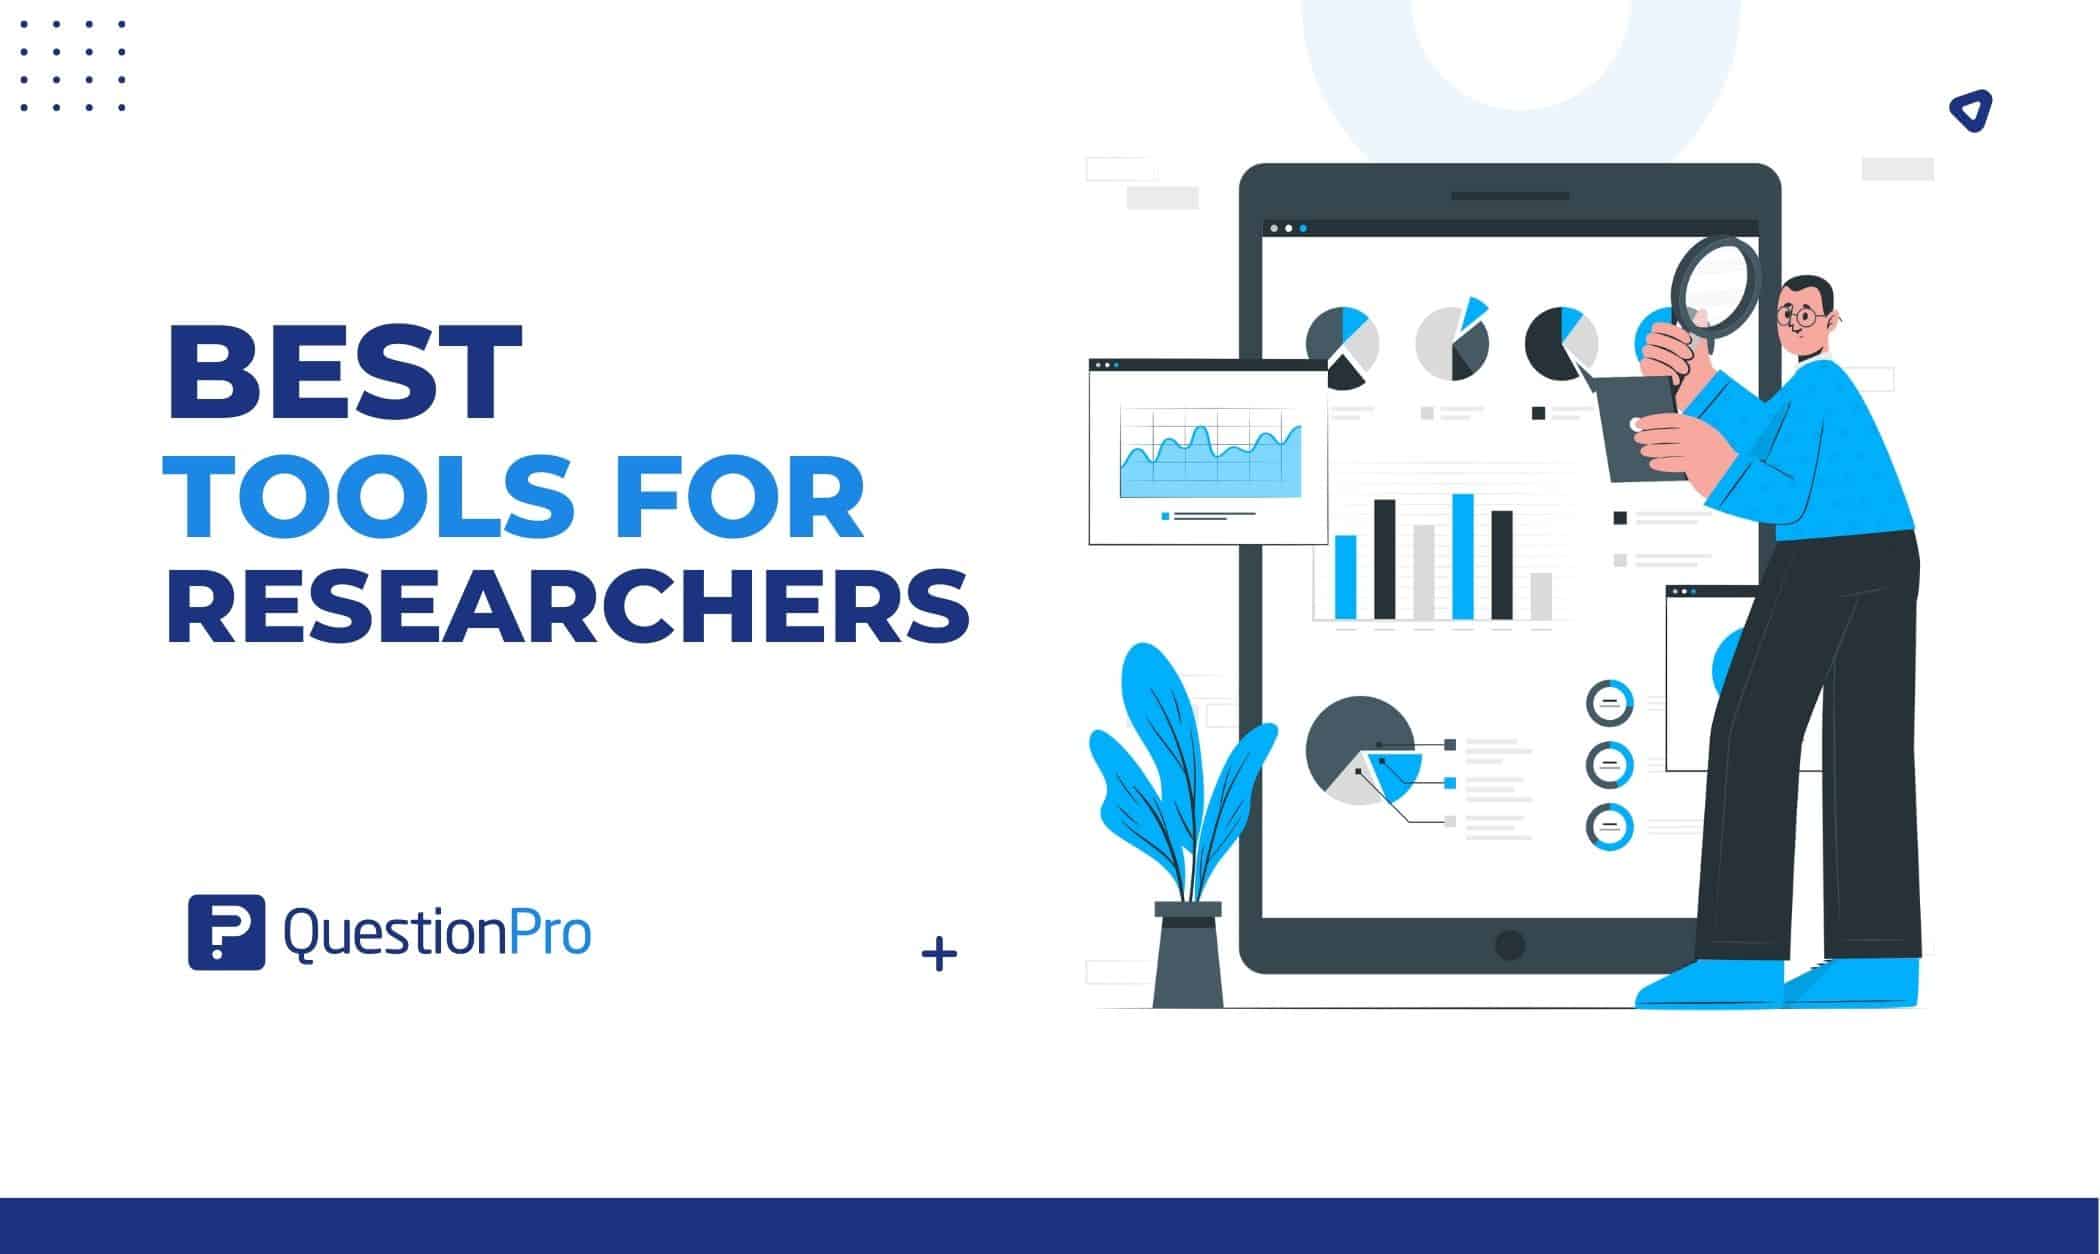 Looking for research and survey tools? Here's a list with some features and prices to check for choosing the best tools for researchers.